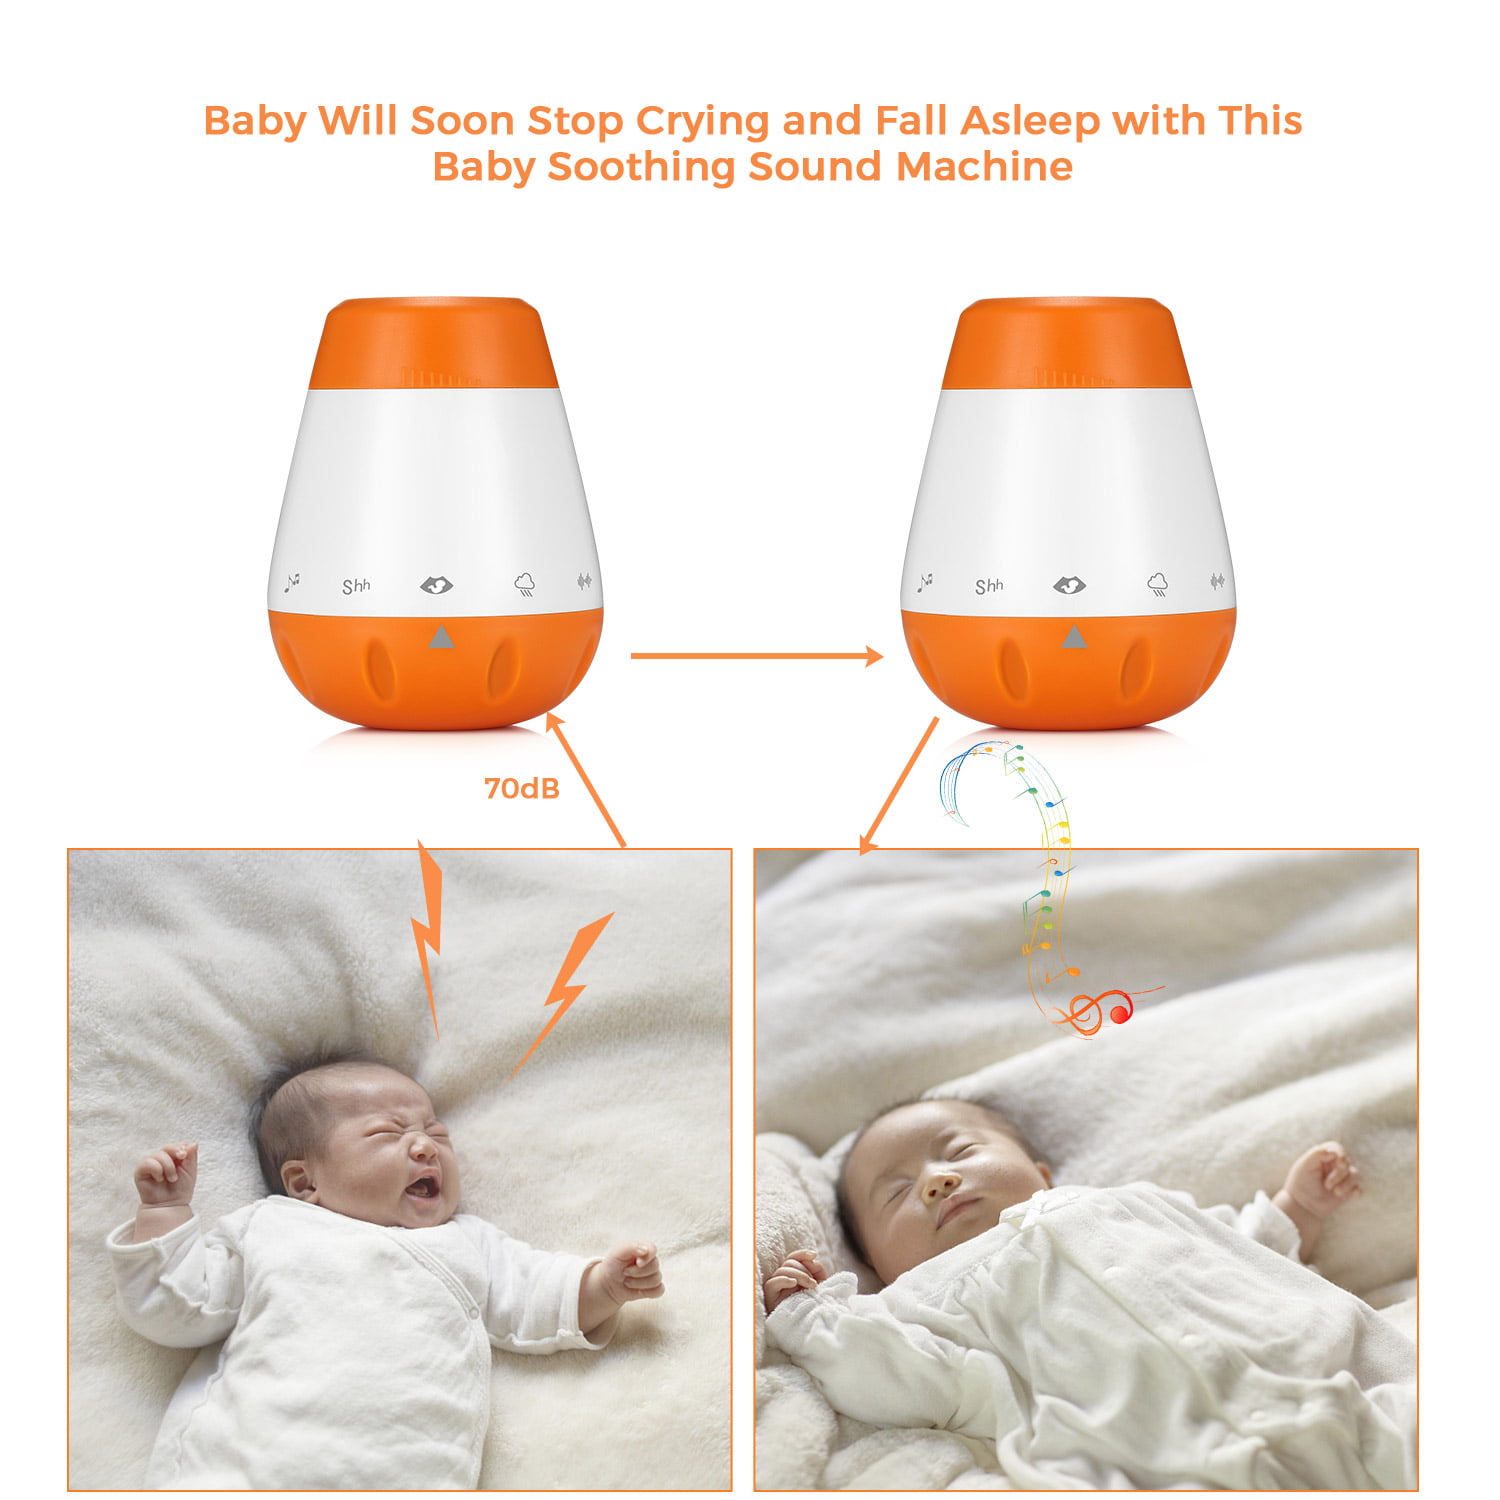 White Noise Machine for Sleeping Aurola Sleep Sound Machine with Non-Looping Soothing Sounds for Baby Adult Traveler Portable for Home Office Travel 